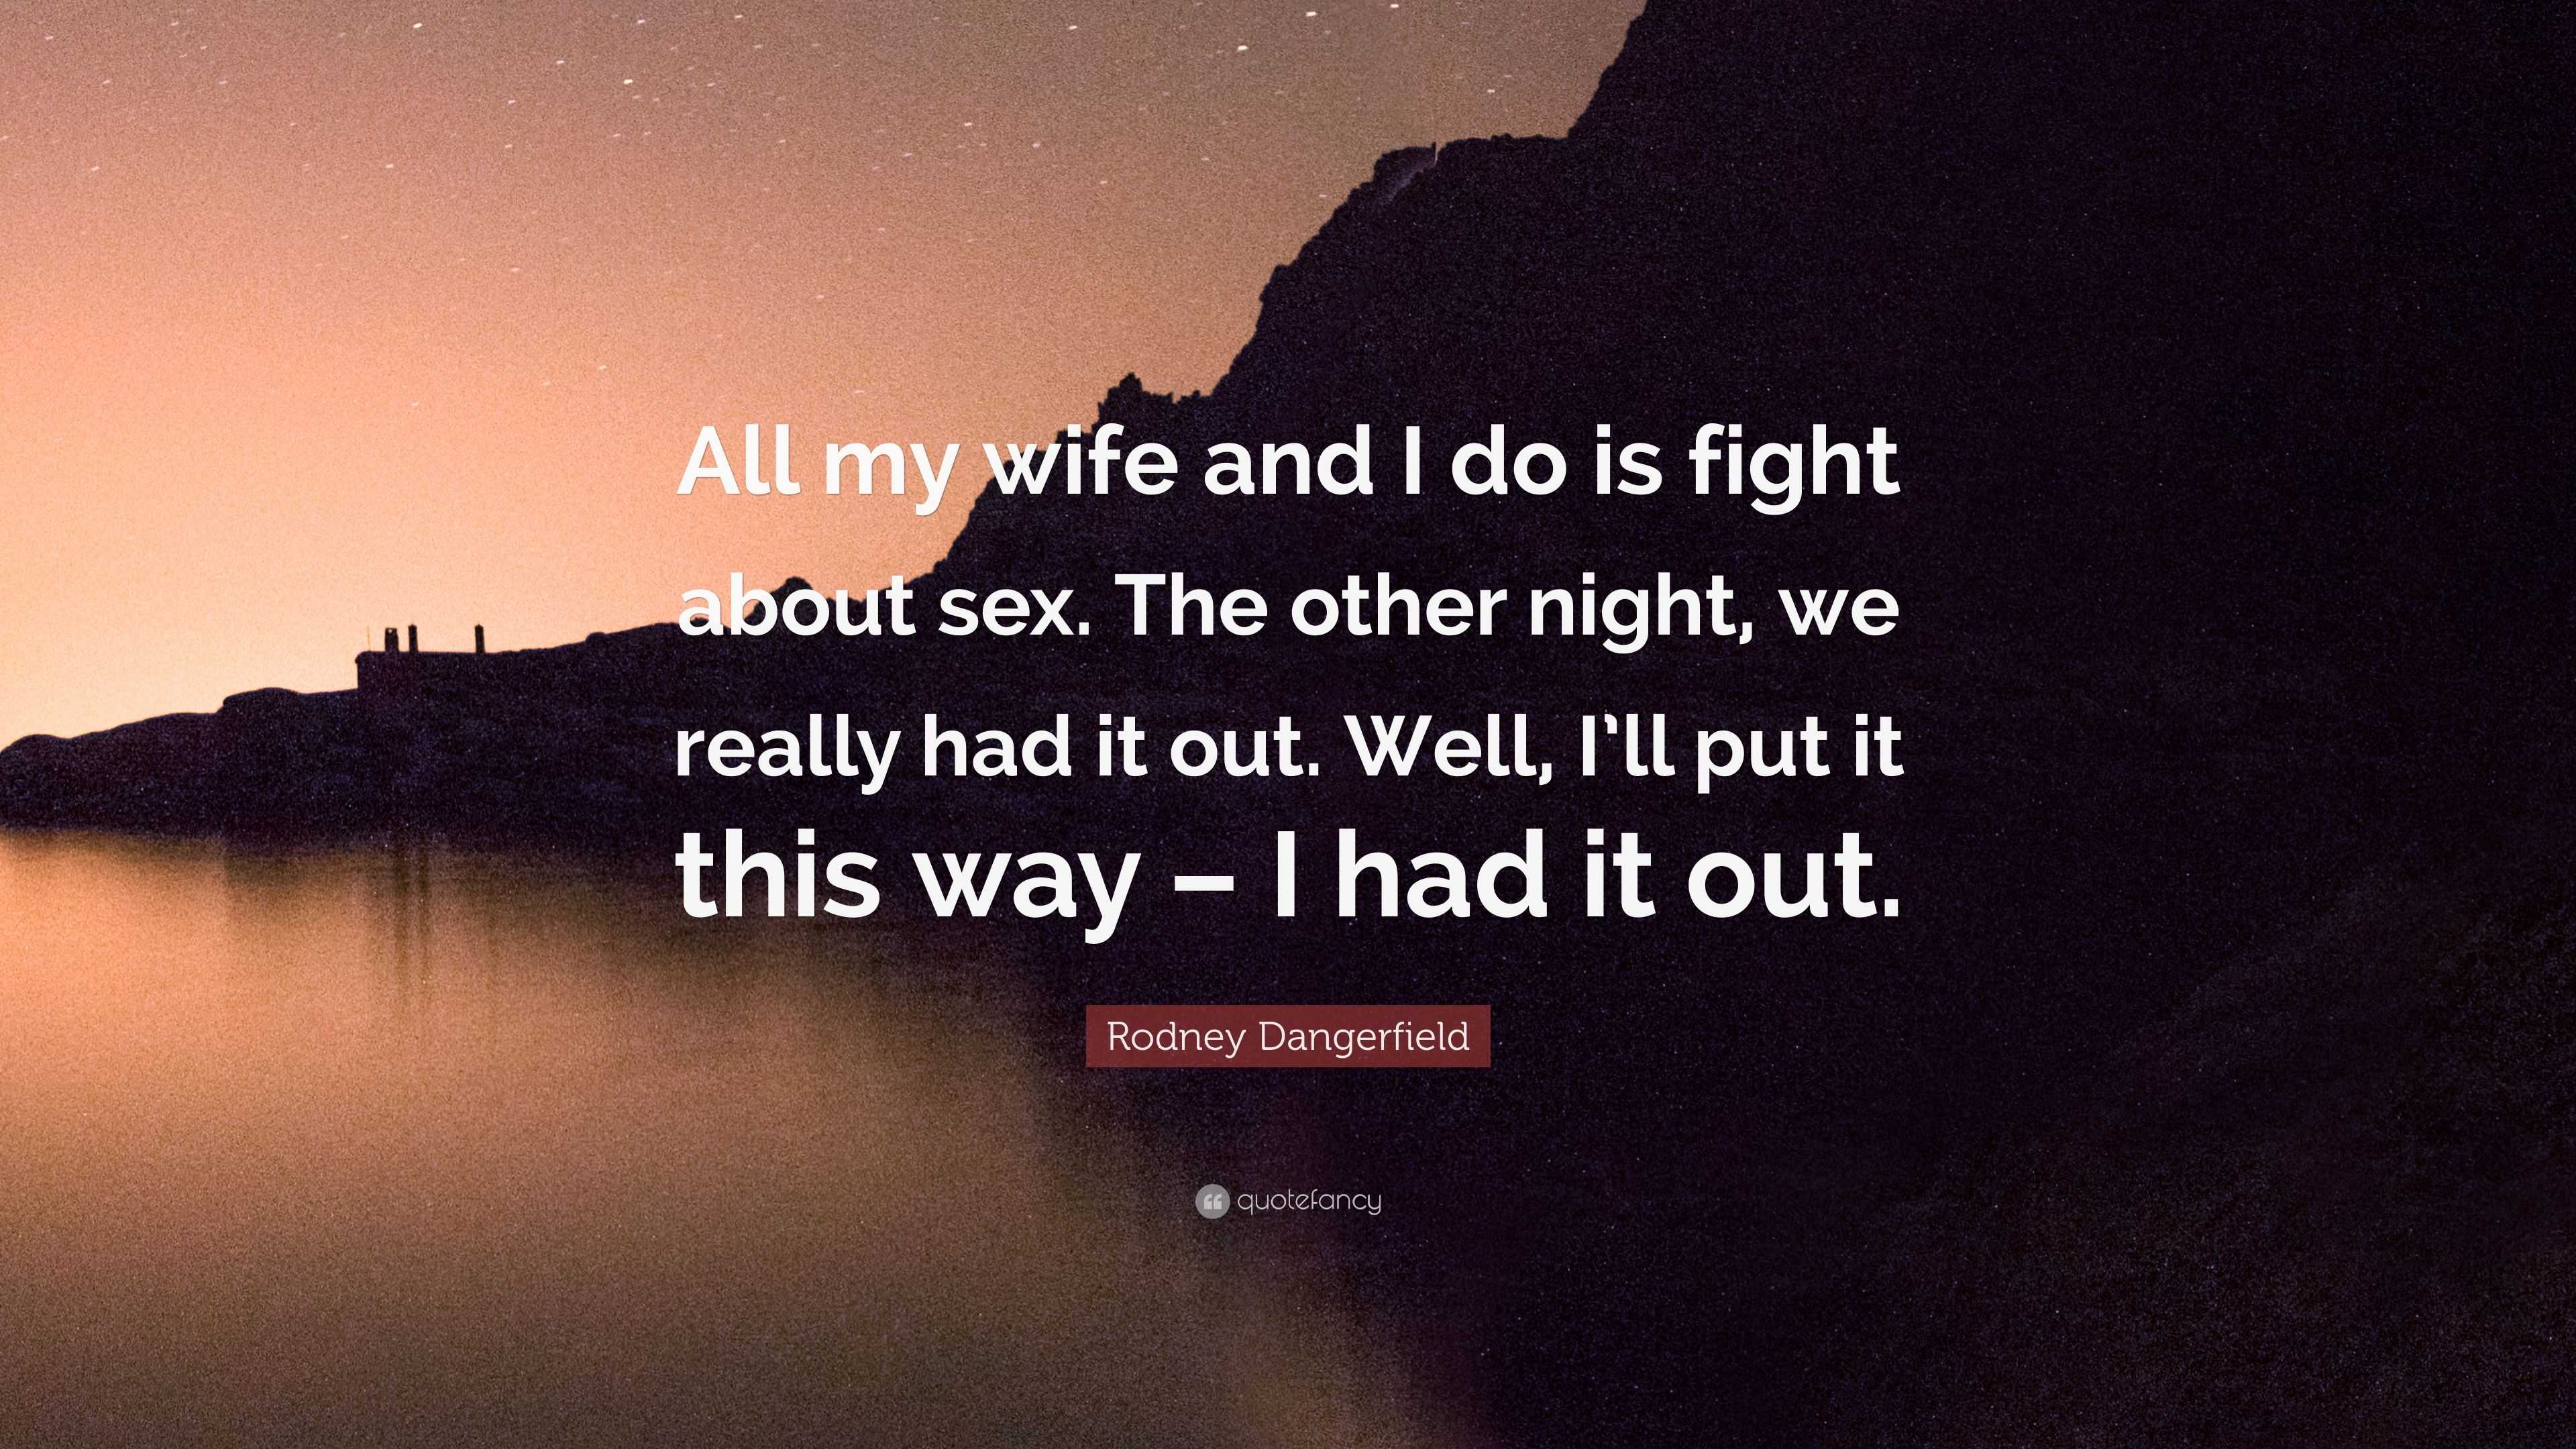 Rodney Dangerfield Quote “All my wife and I do is fight about